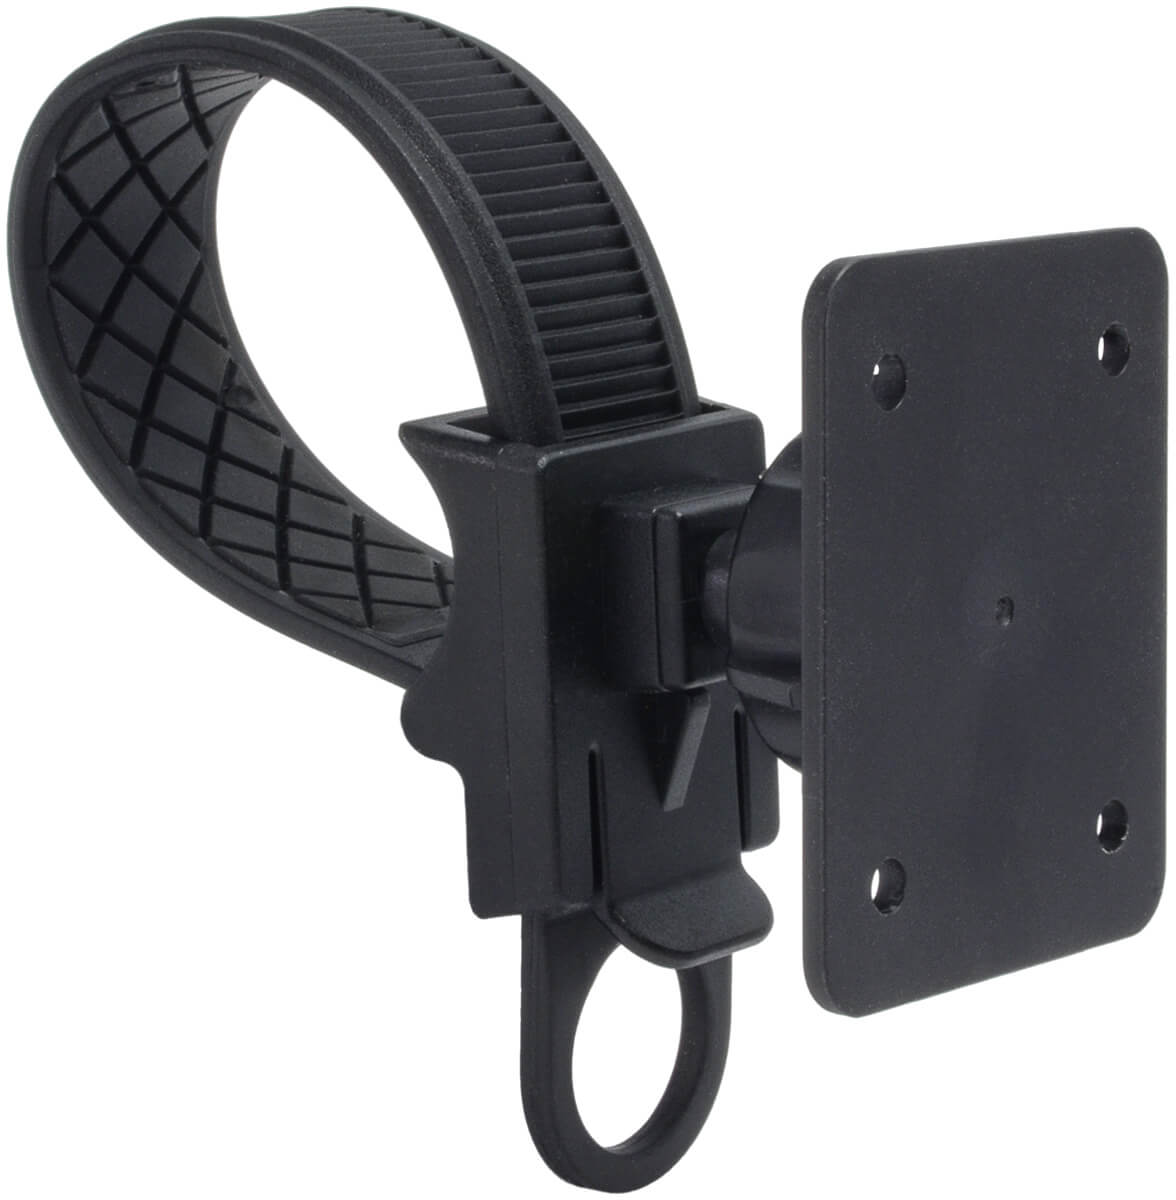 Satellite Radio strap mount for handlebars with AMPS plate